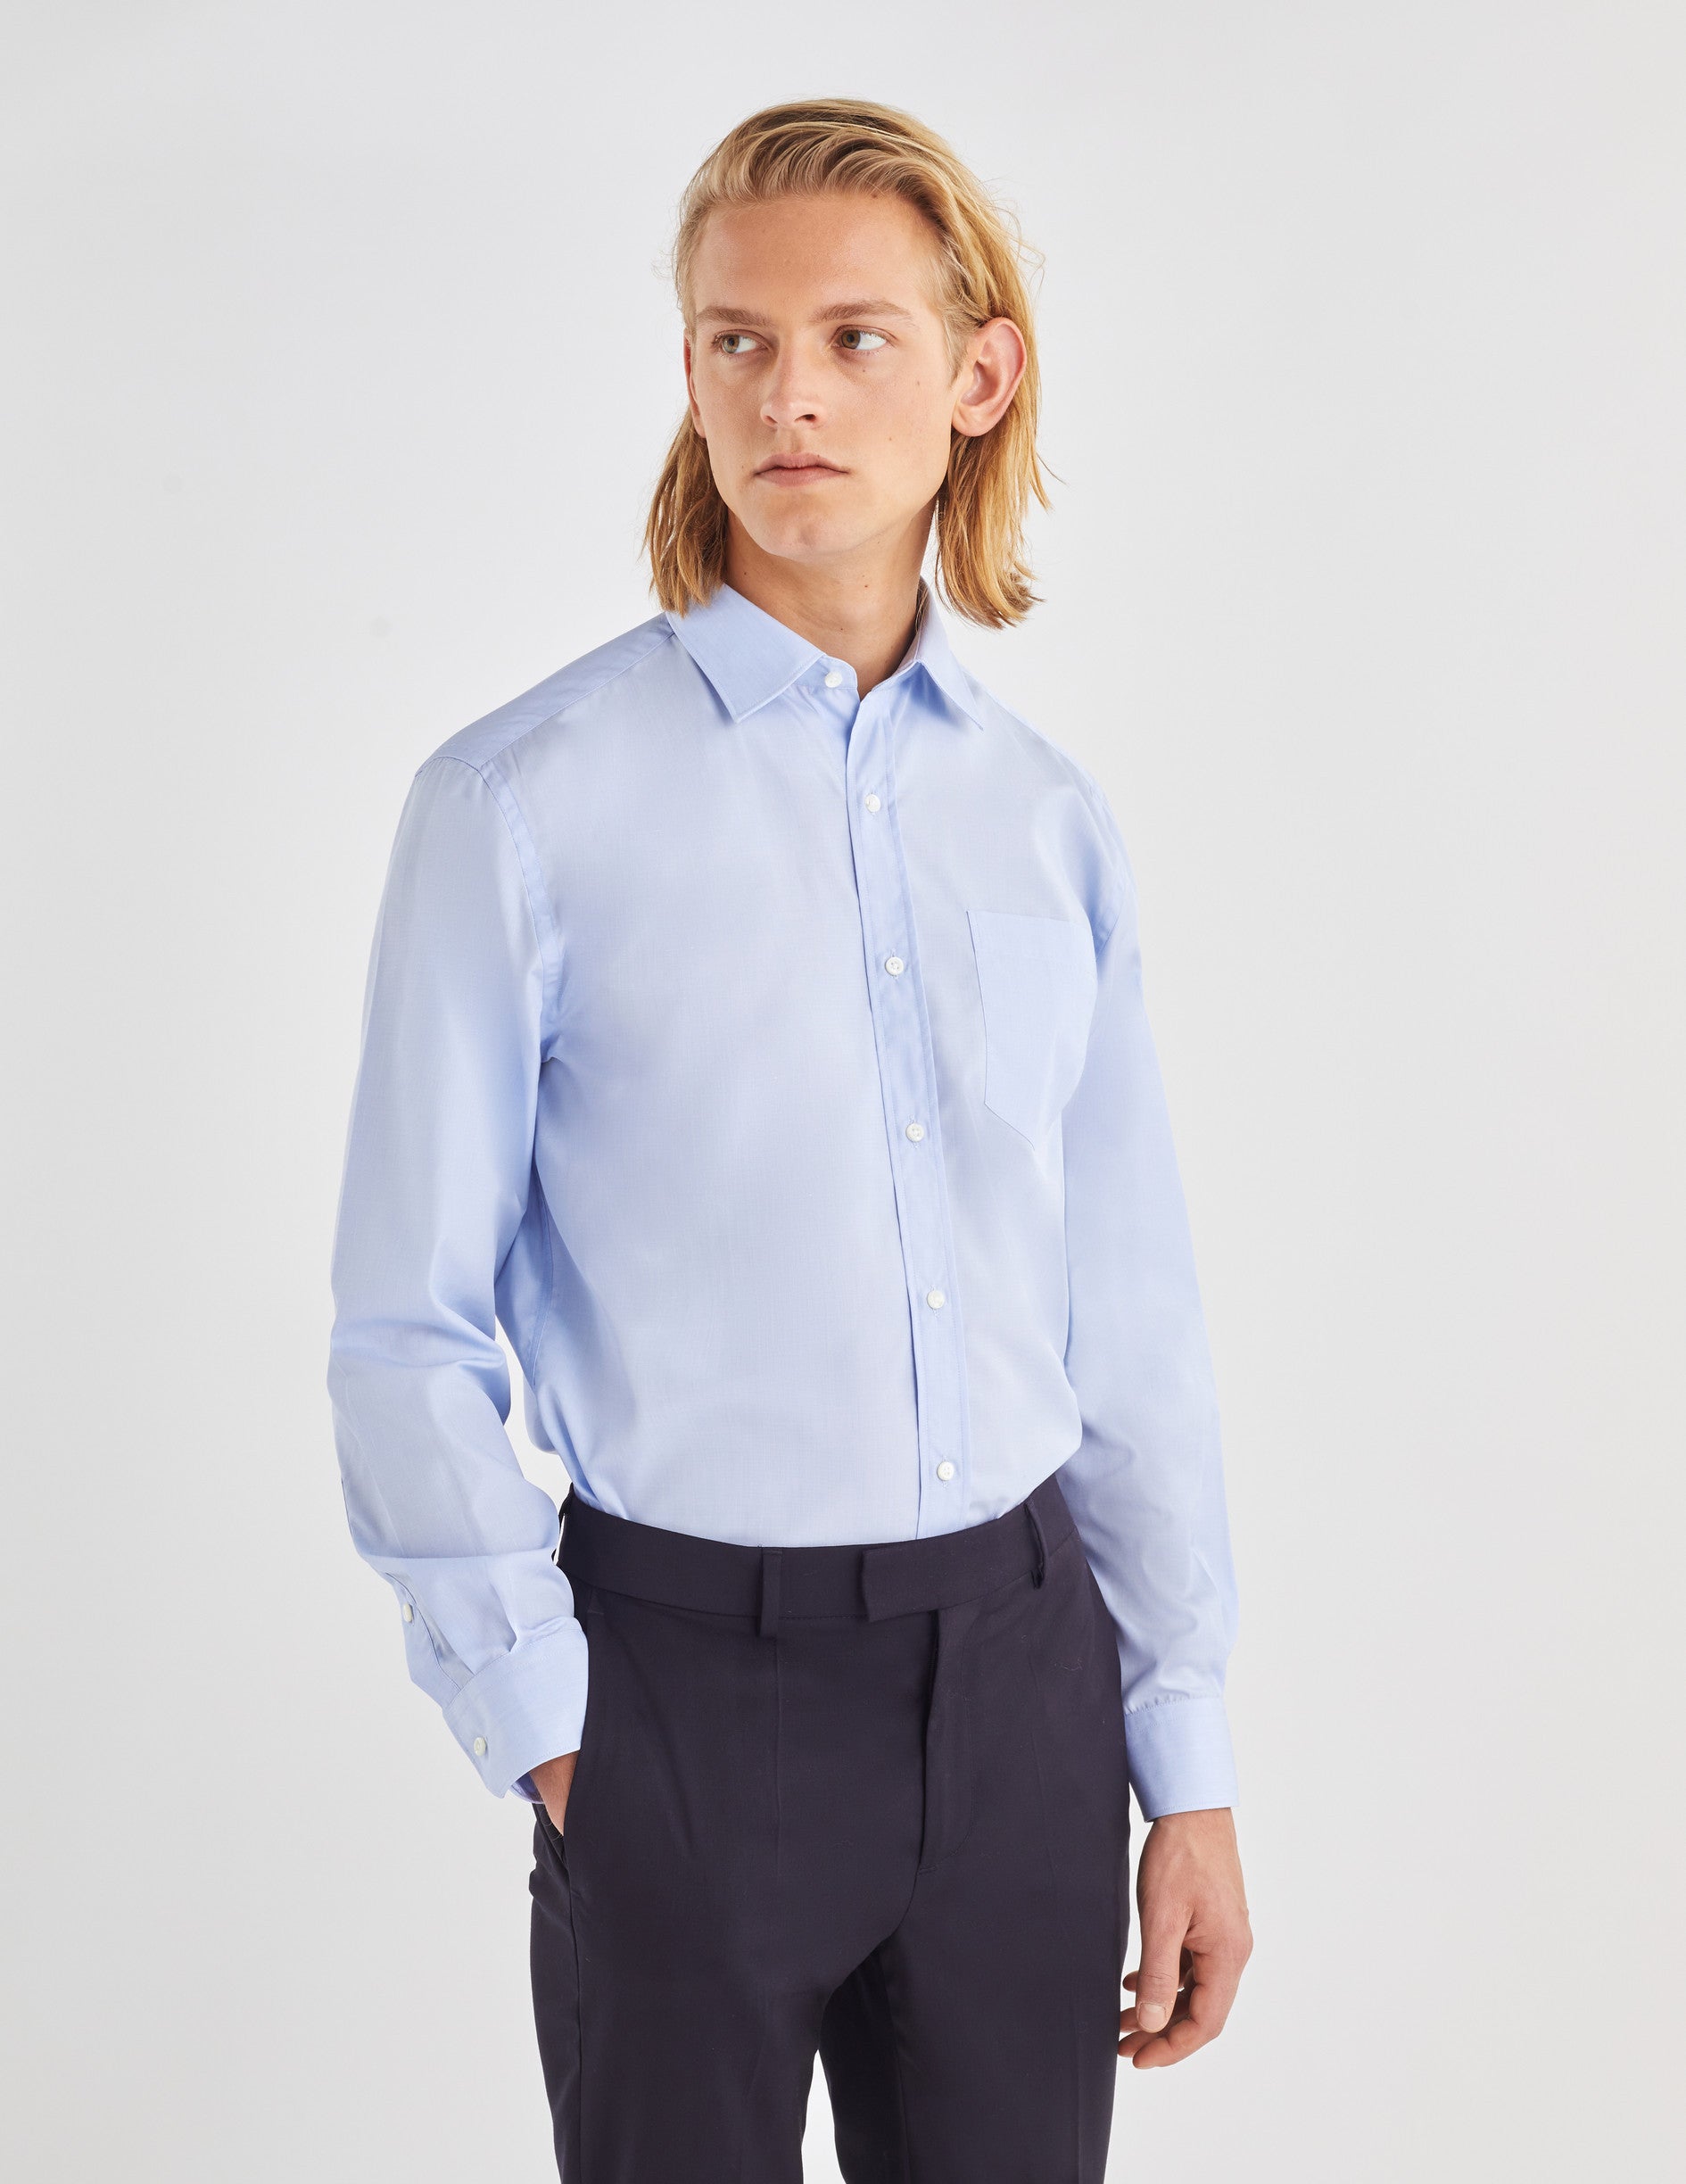 Classic blue wrinkle-free shirt - Wire to wire - Figaret Collar